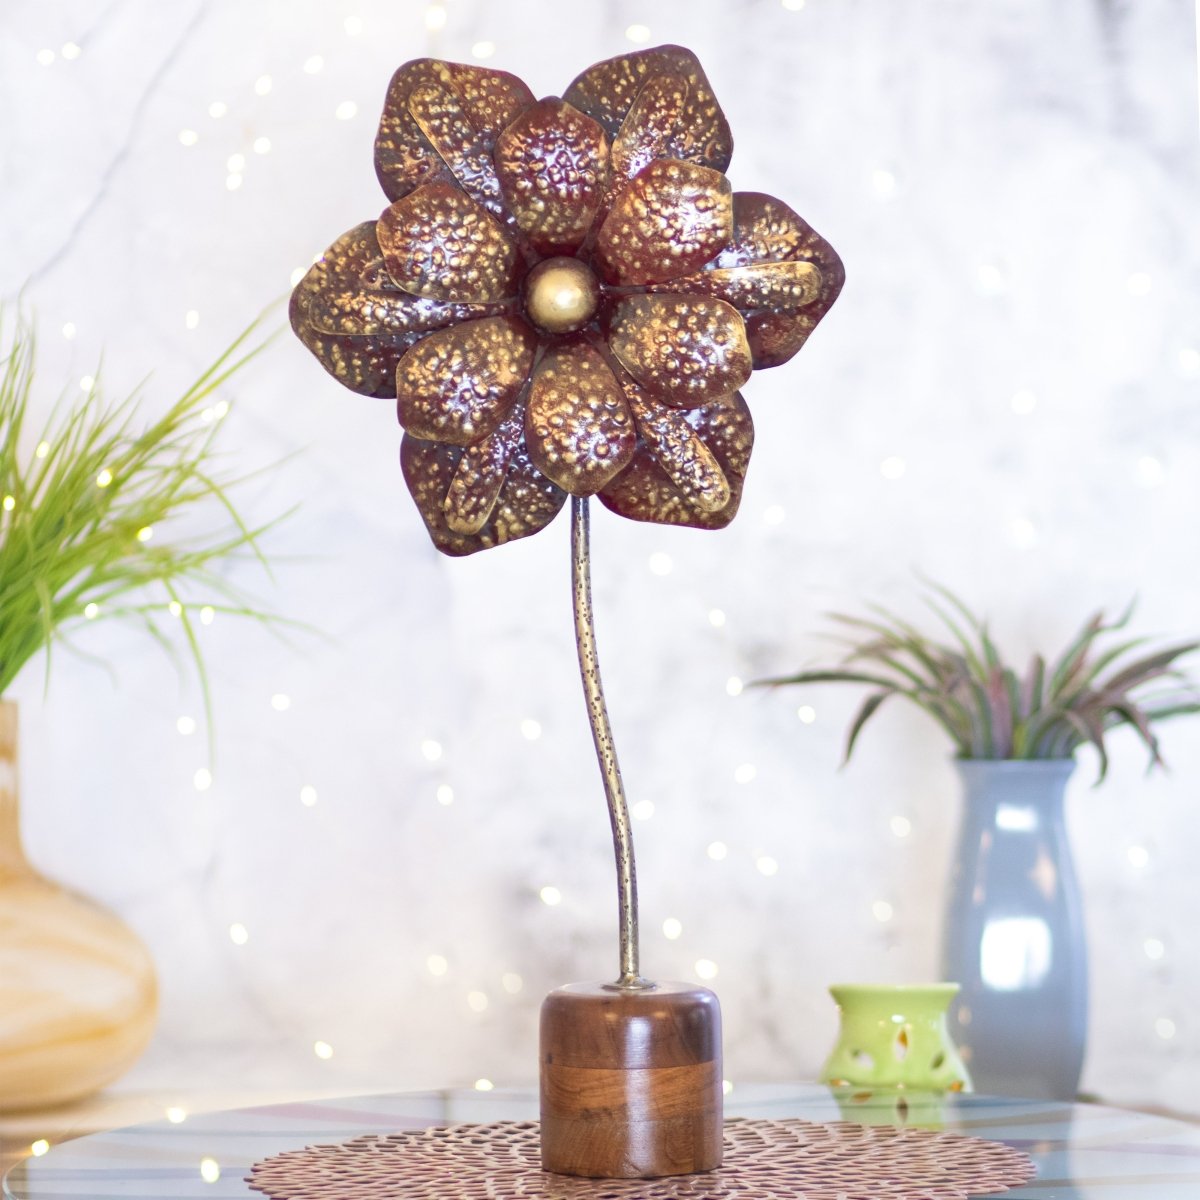 Kezevel Metal Flower Table Decor - Handcrafted Golden and Red Big Flower Figurines Statue Metal Showpieces for Home Decor